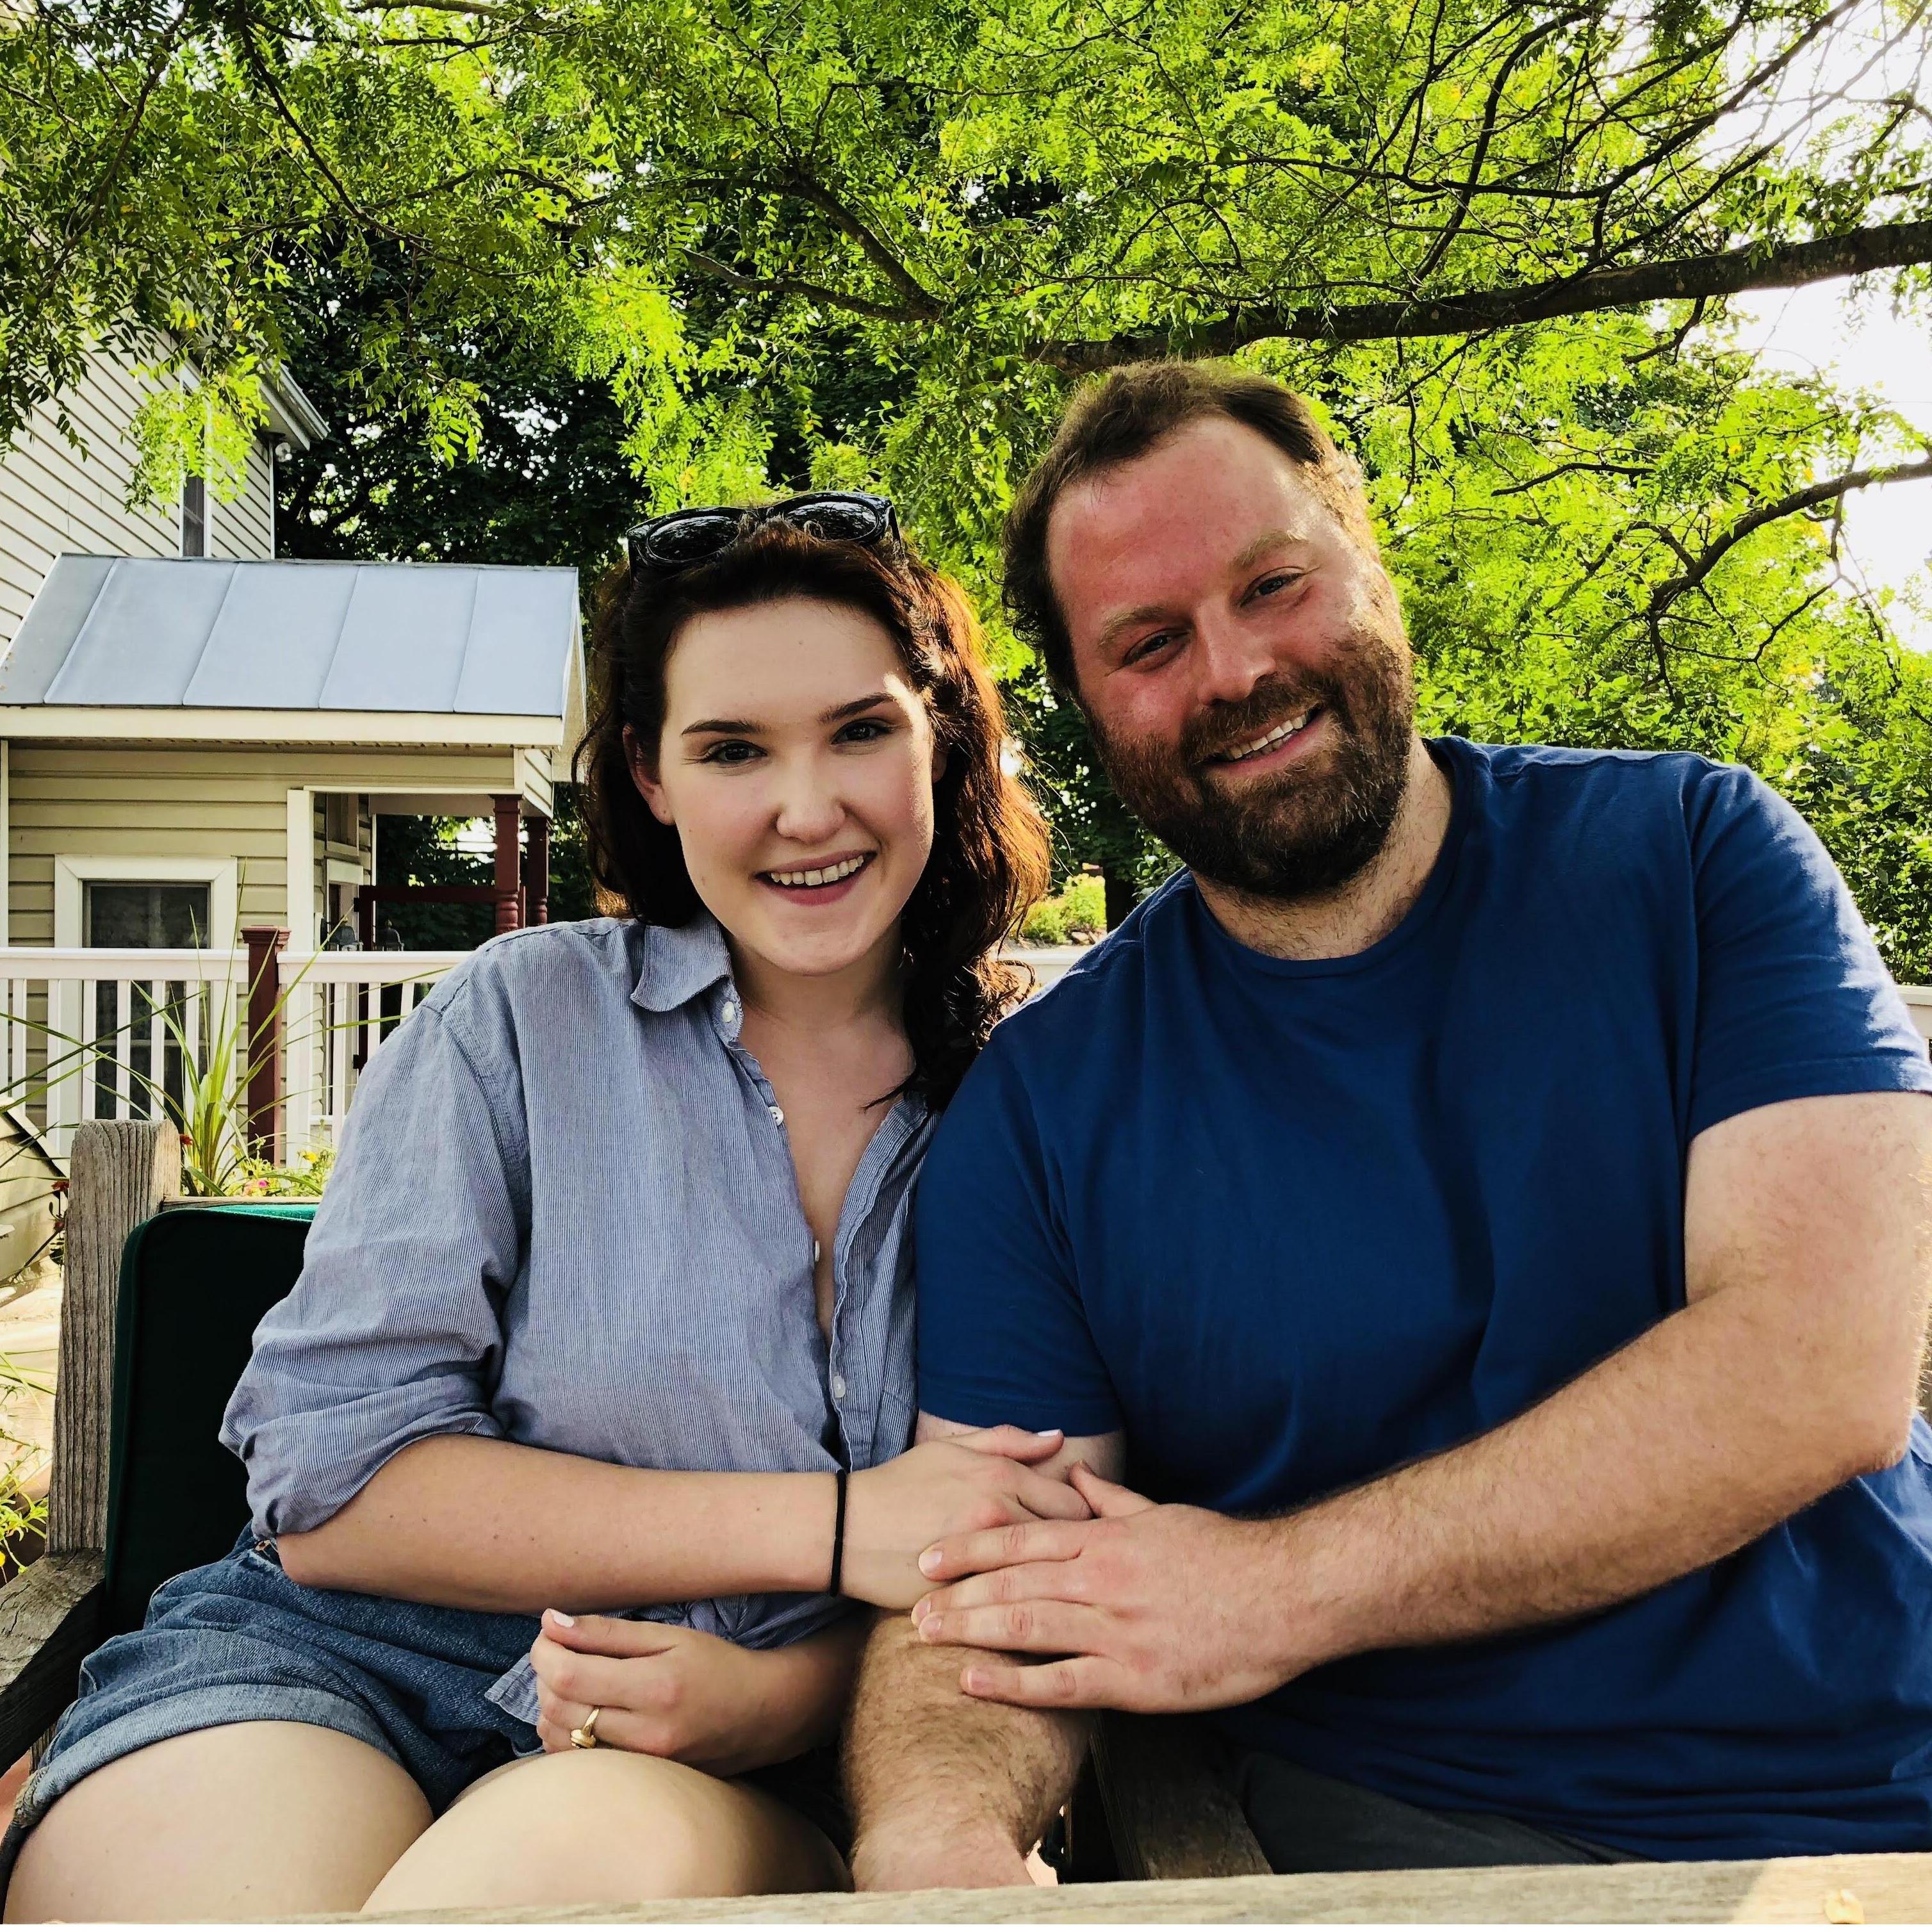 A hot day on the Farm is best spent with your favorite person, hangin on the deck! July 2018